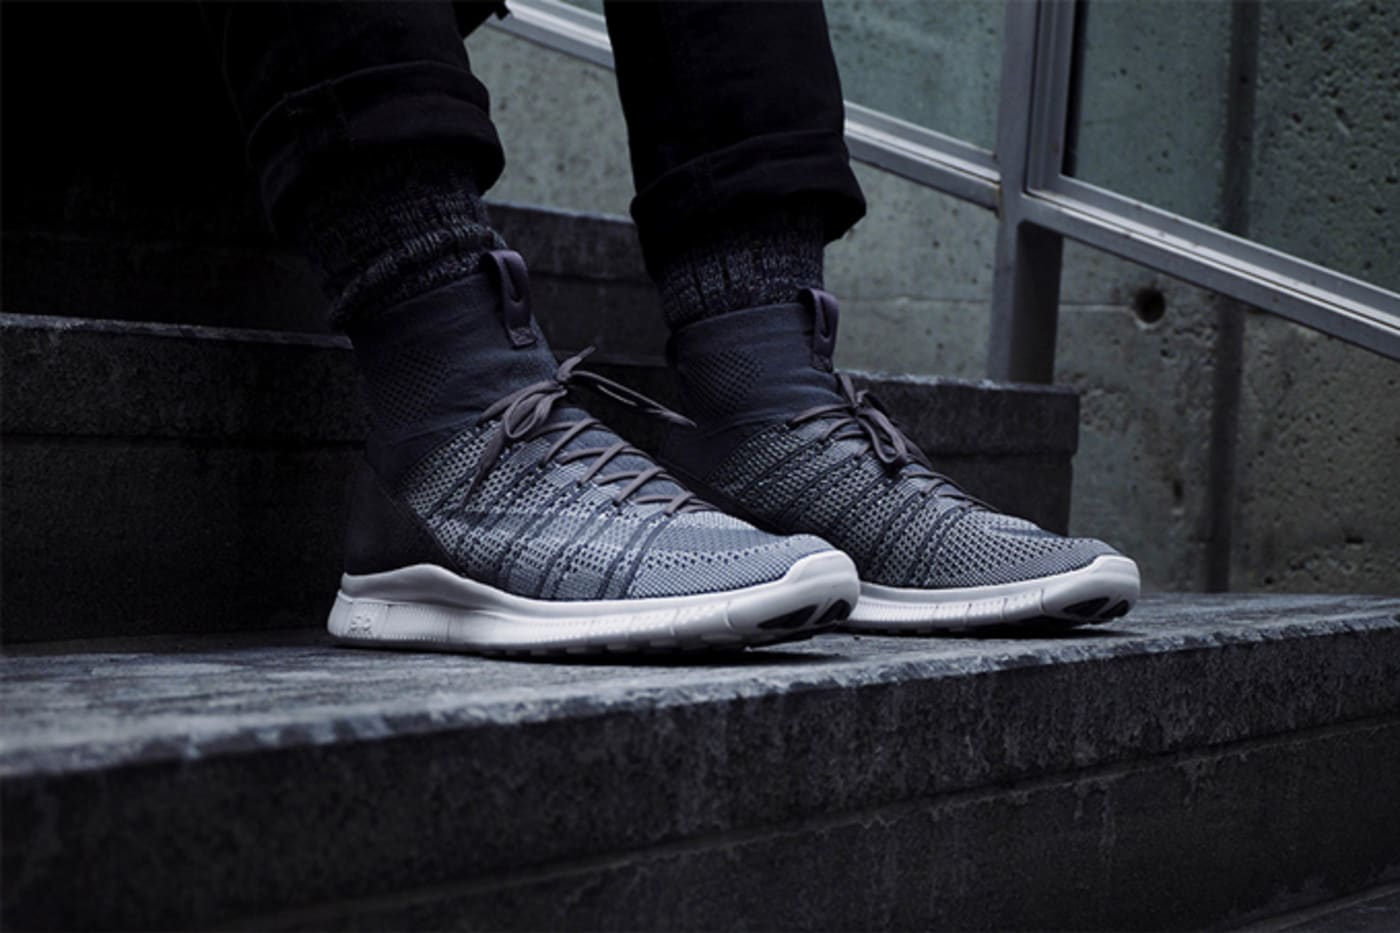 Nike Free Mercurial Superfly “Dark Grey” (Non-HTM) | Complex